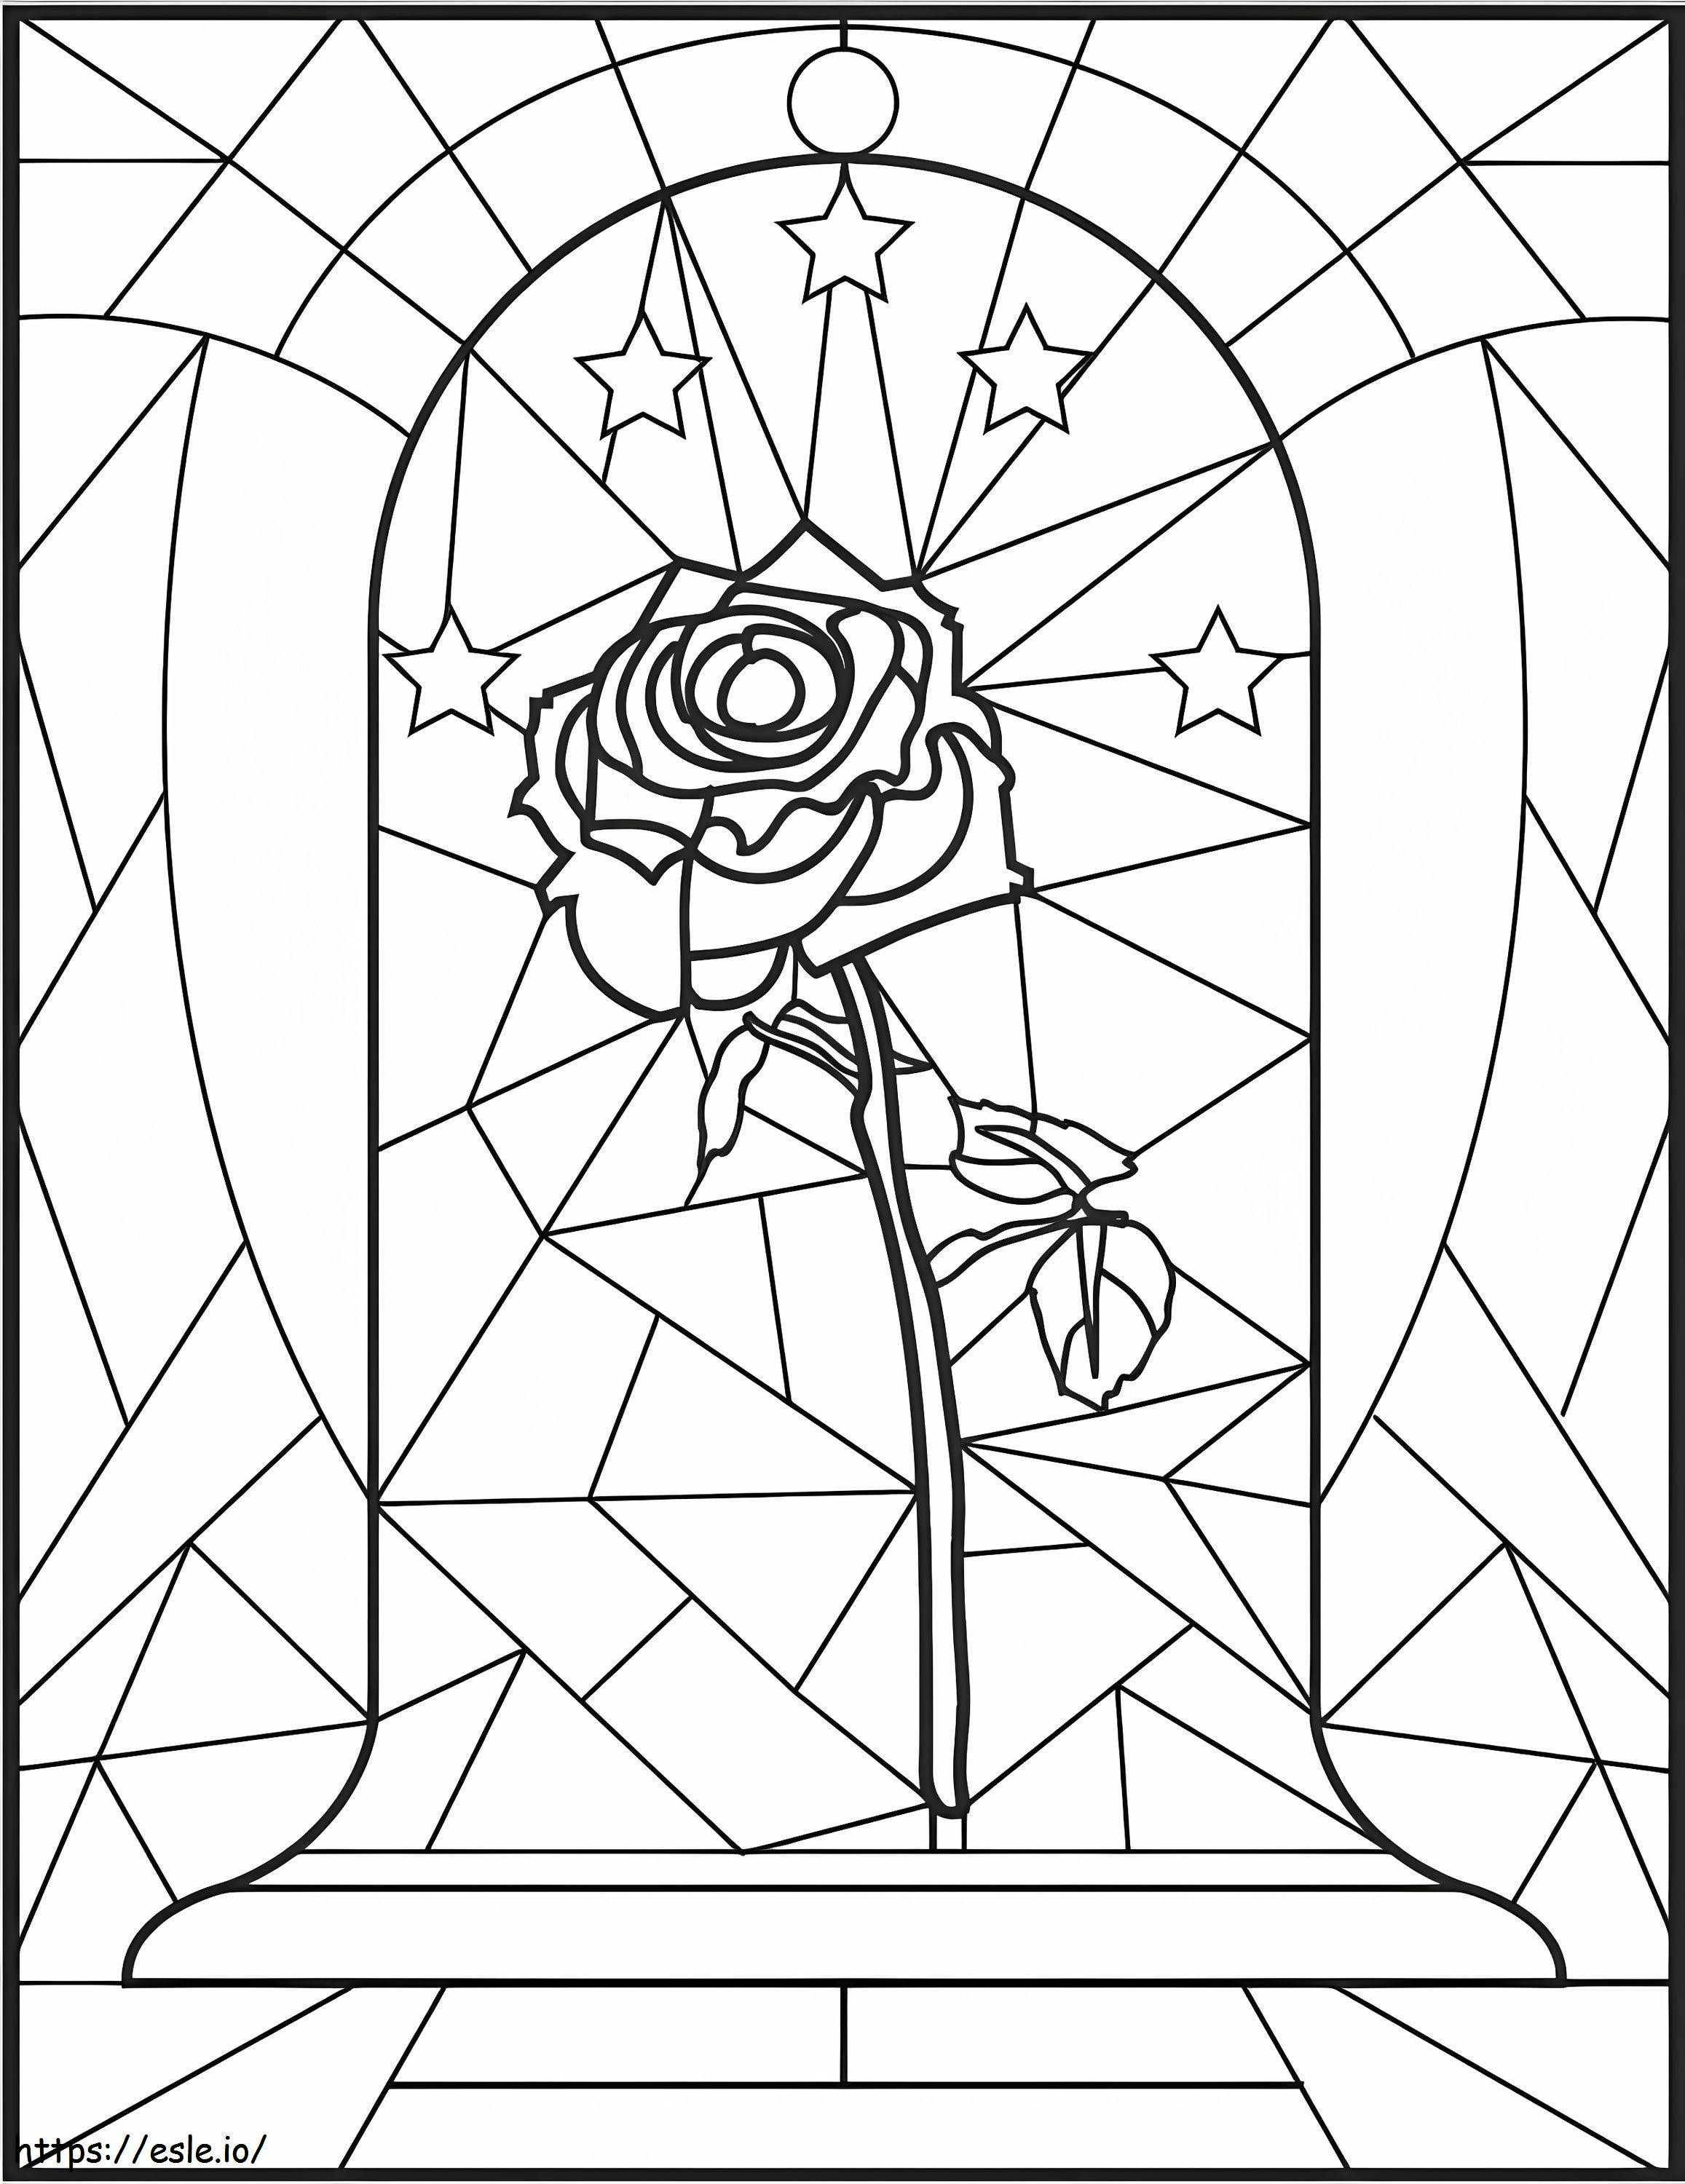 Stained Glass Rose coloring page